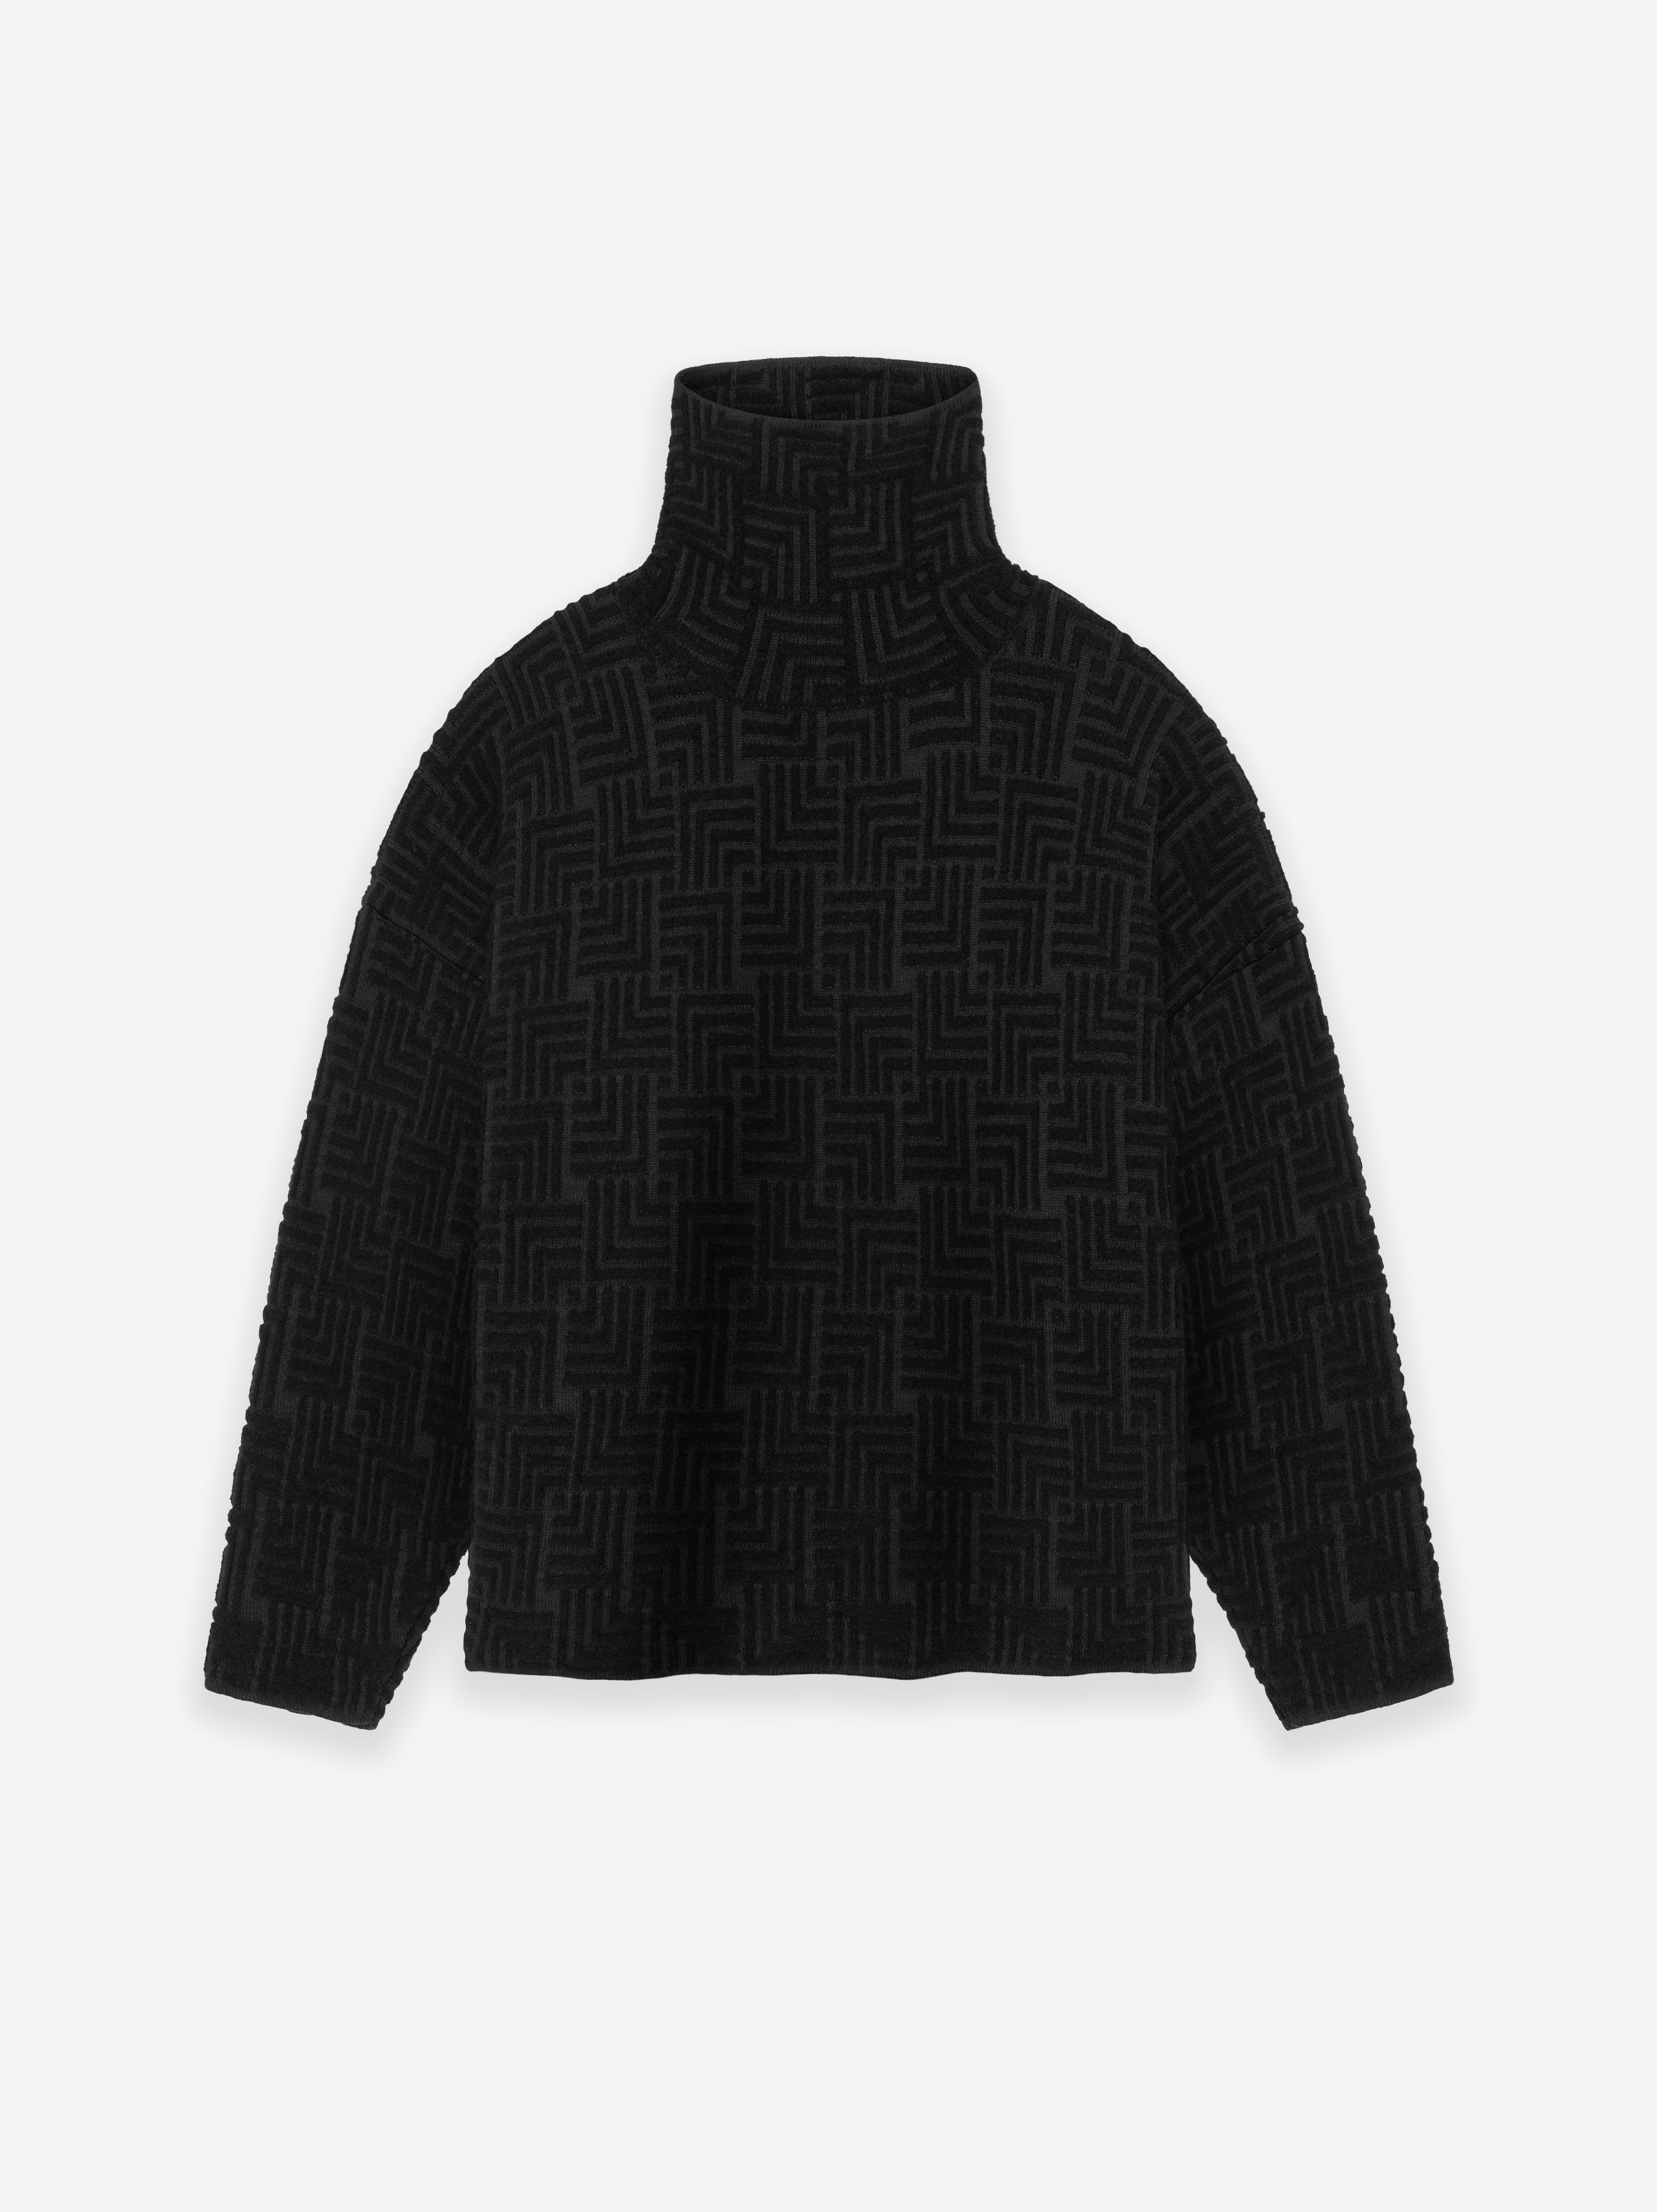 Wool Jacquard High Neck Sweater | Fear of God